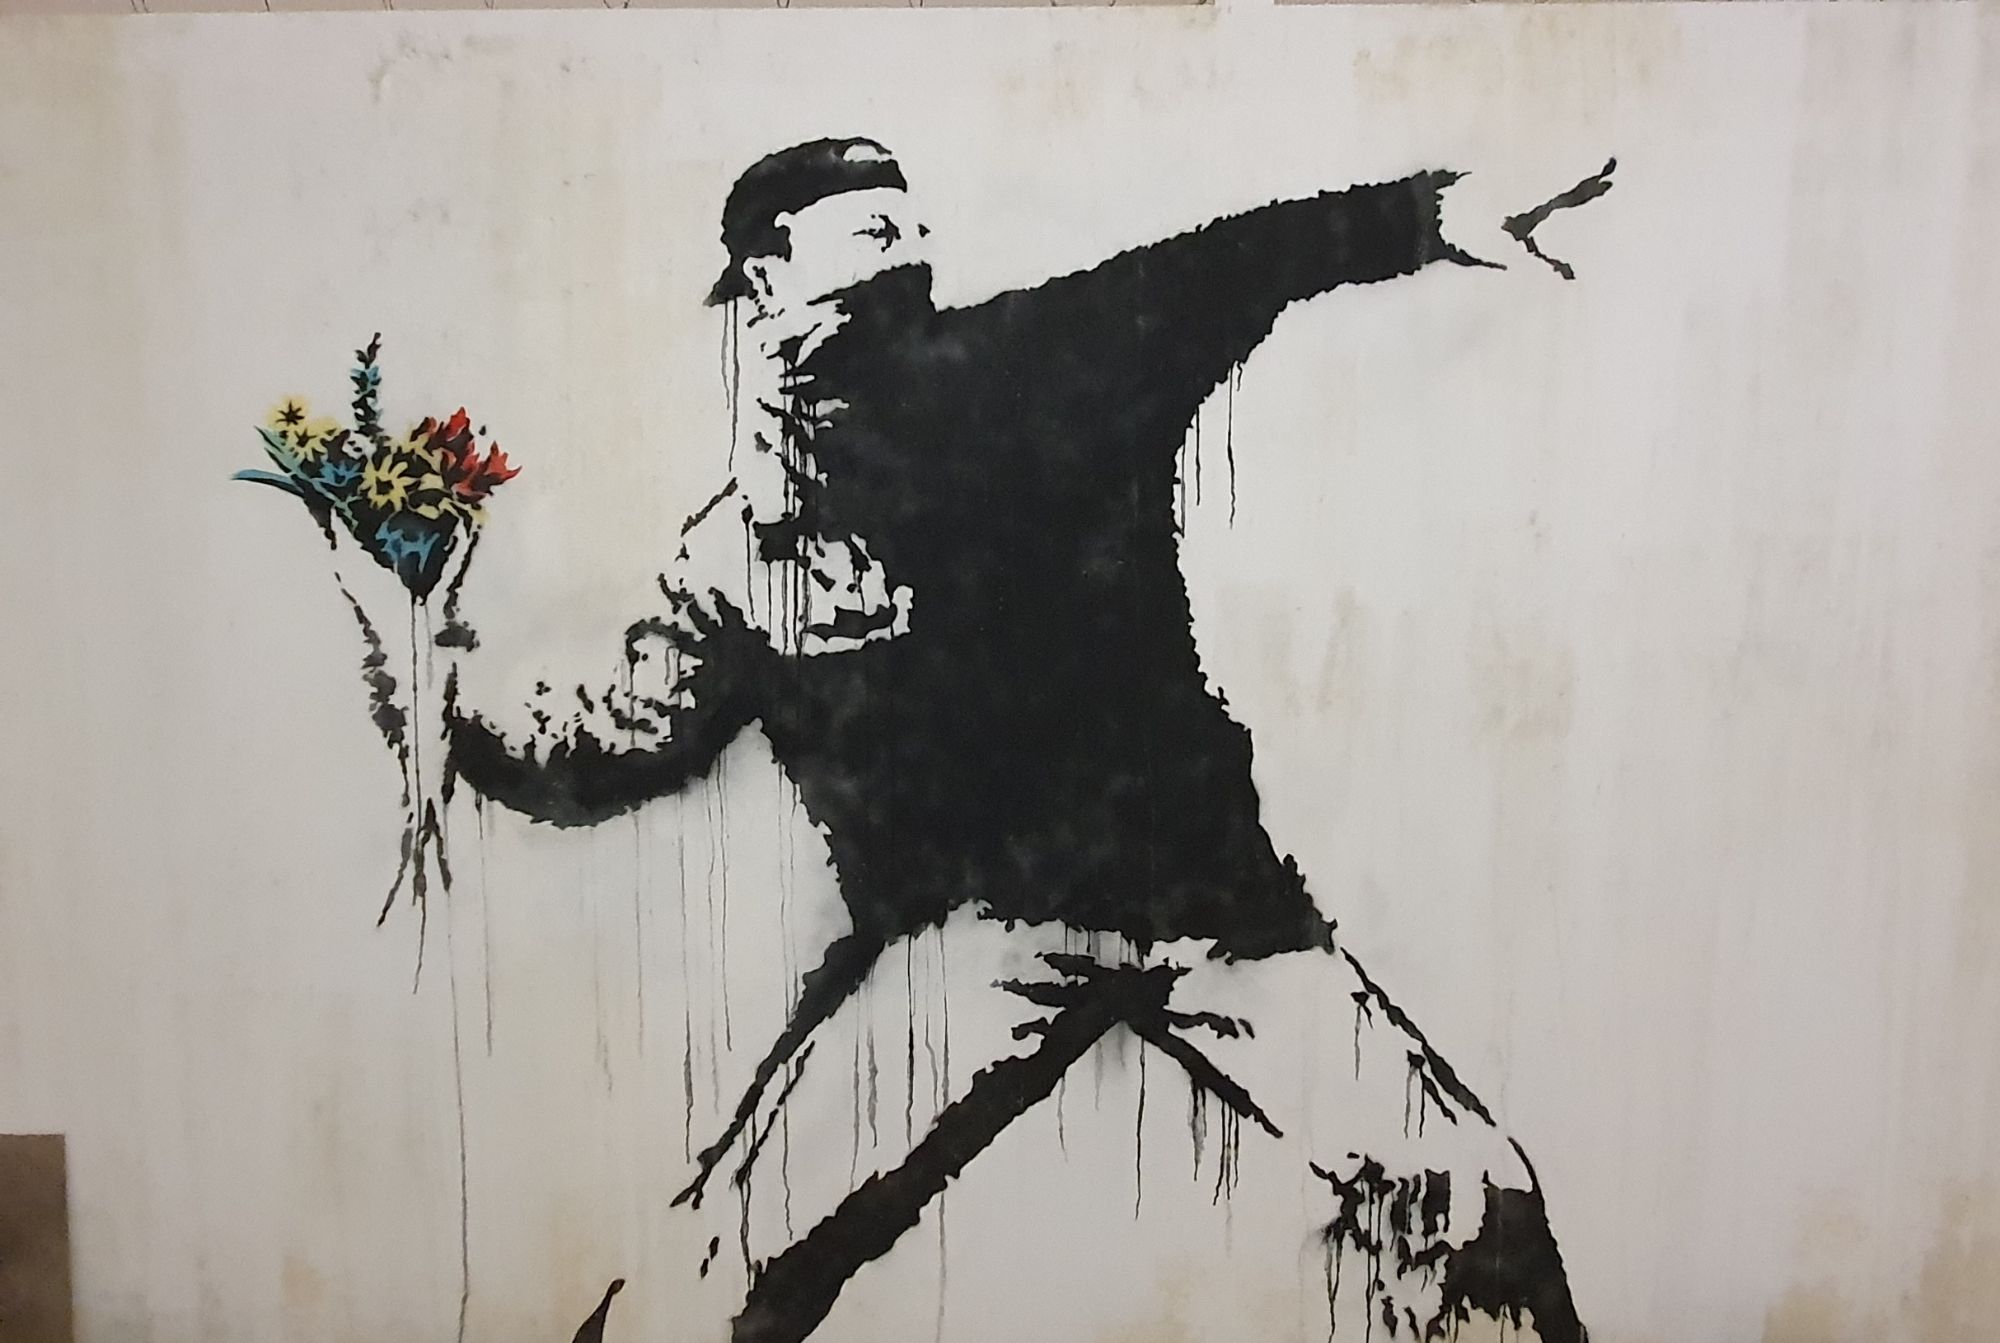 Banksy work of a masked man about to throw a bouquet of flowers.